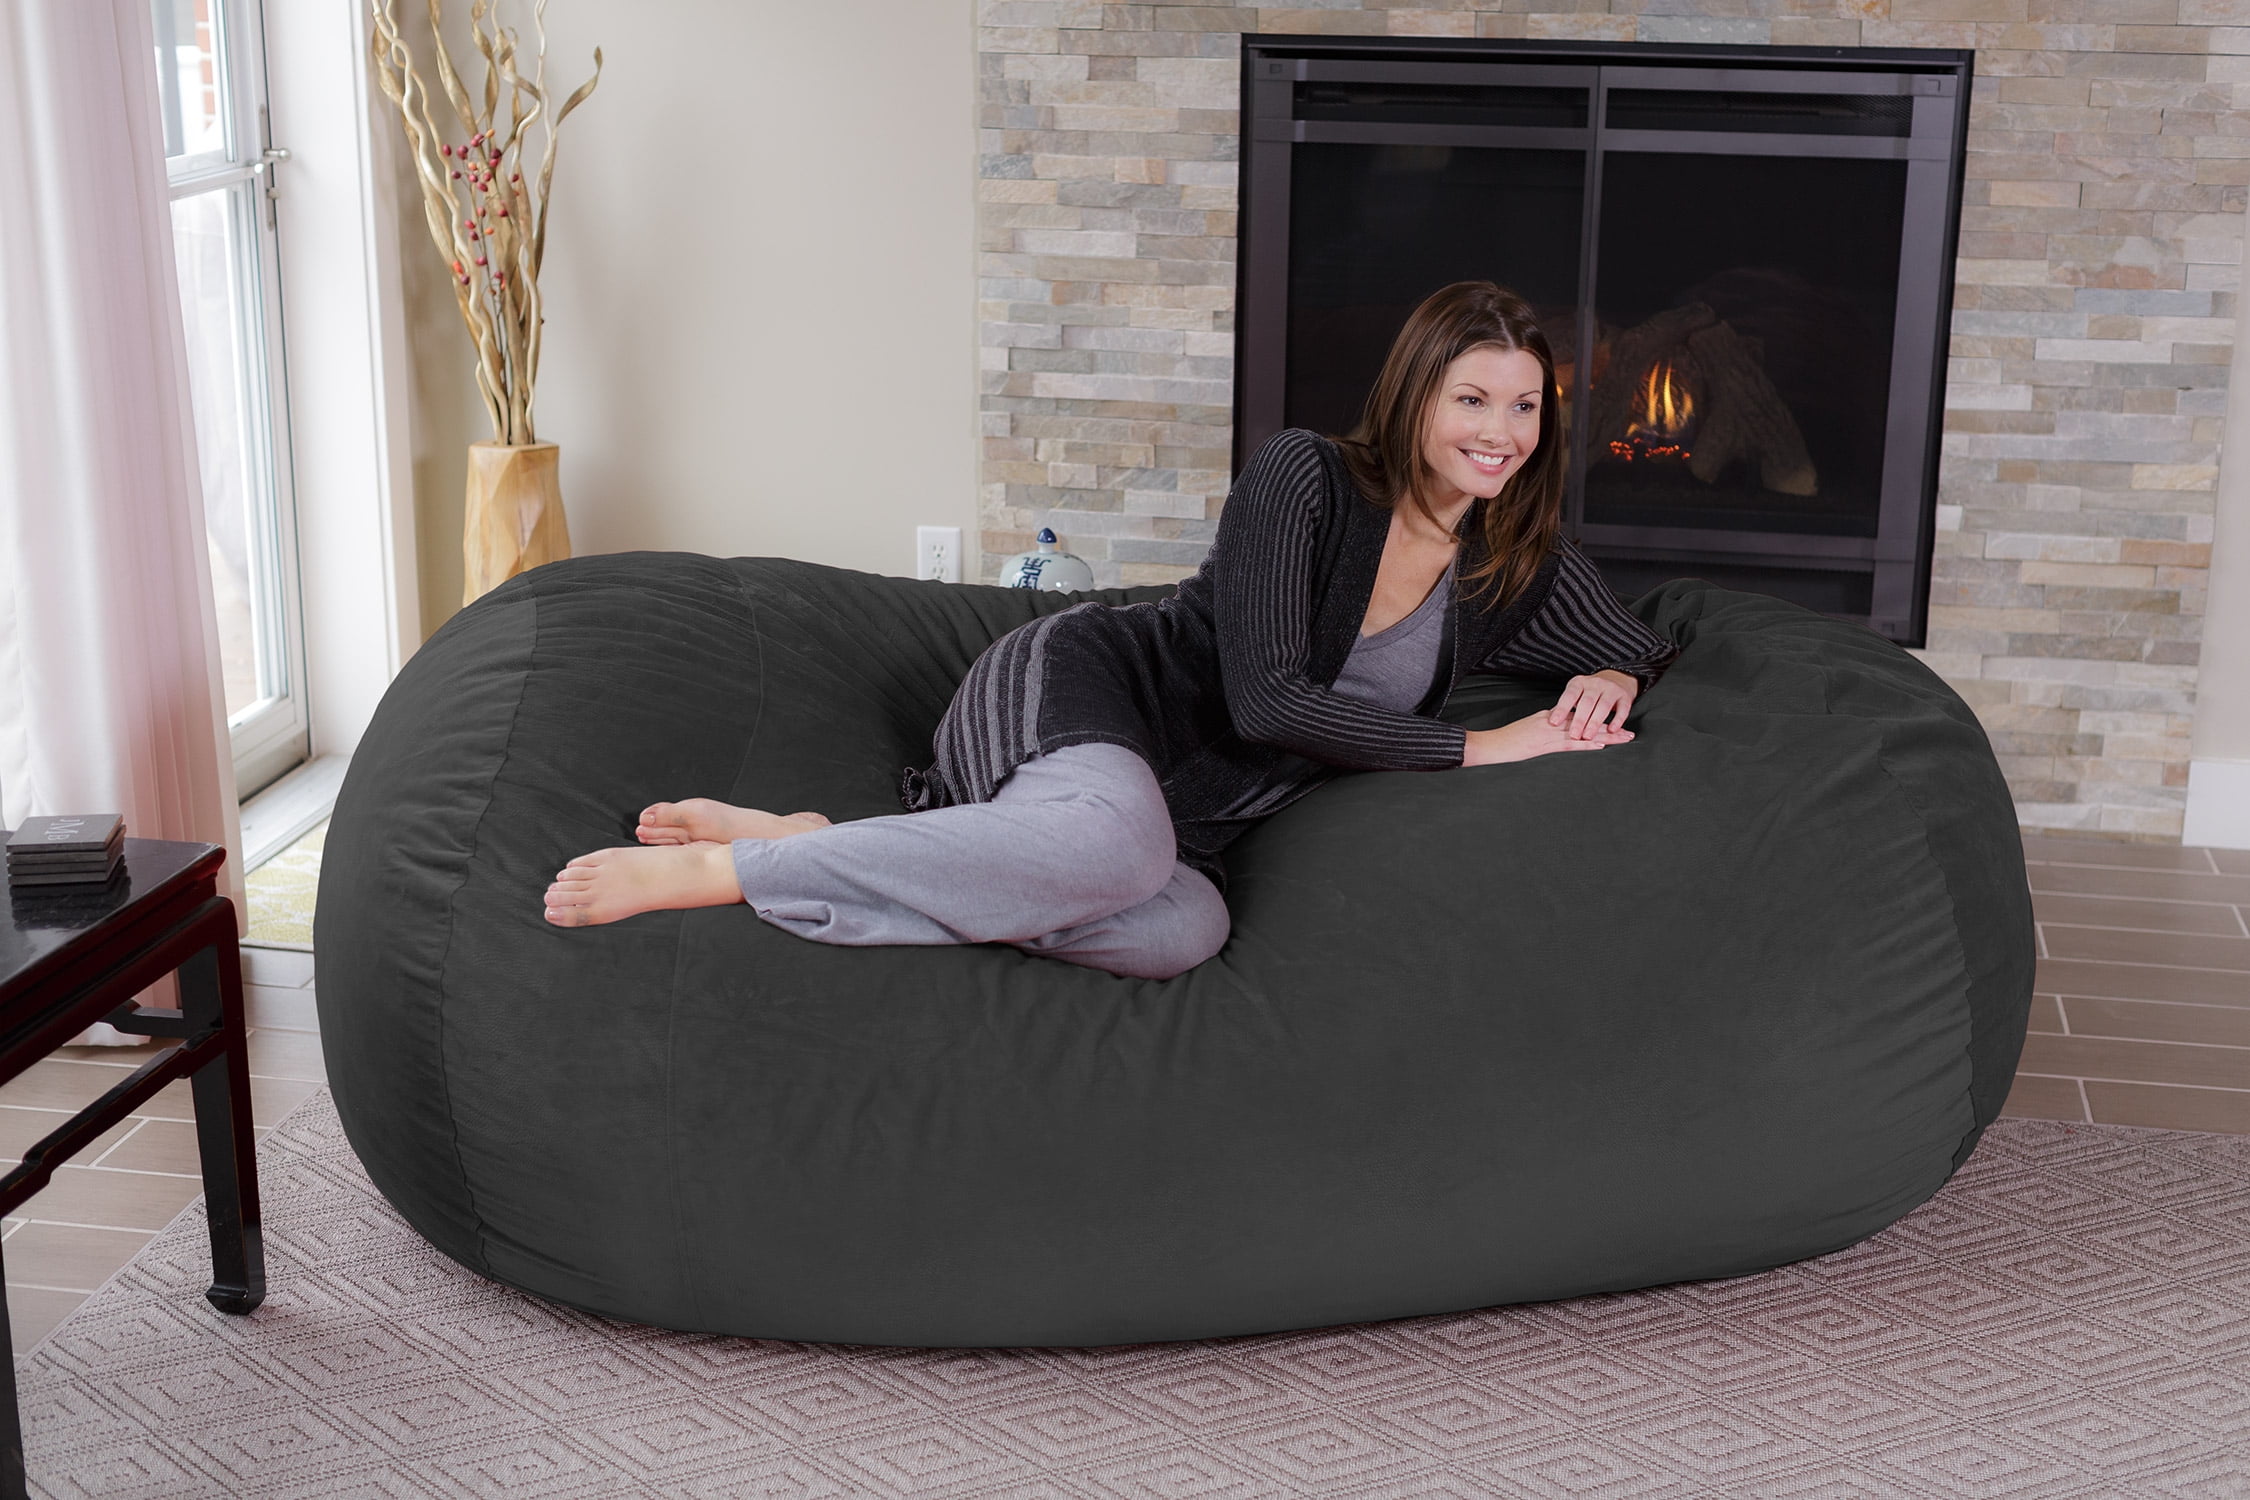 Chill Sack Bean Bag Chair, Memory Foam Lounger with Microsuede Cover ...